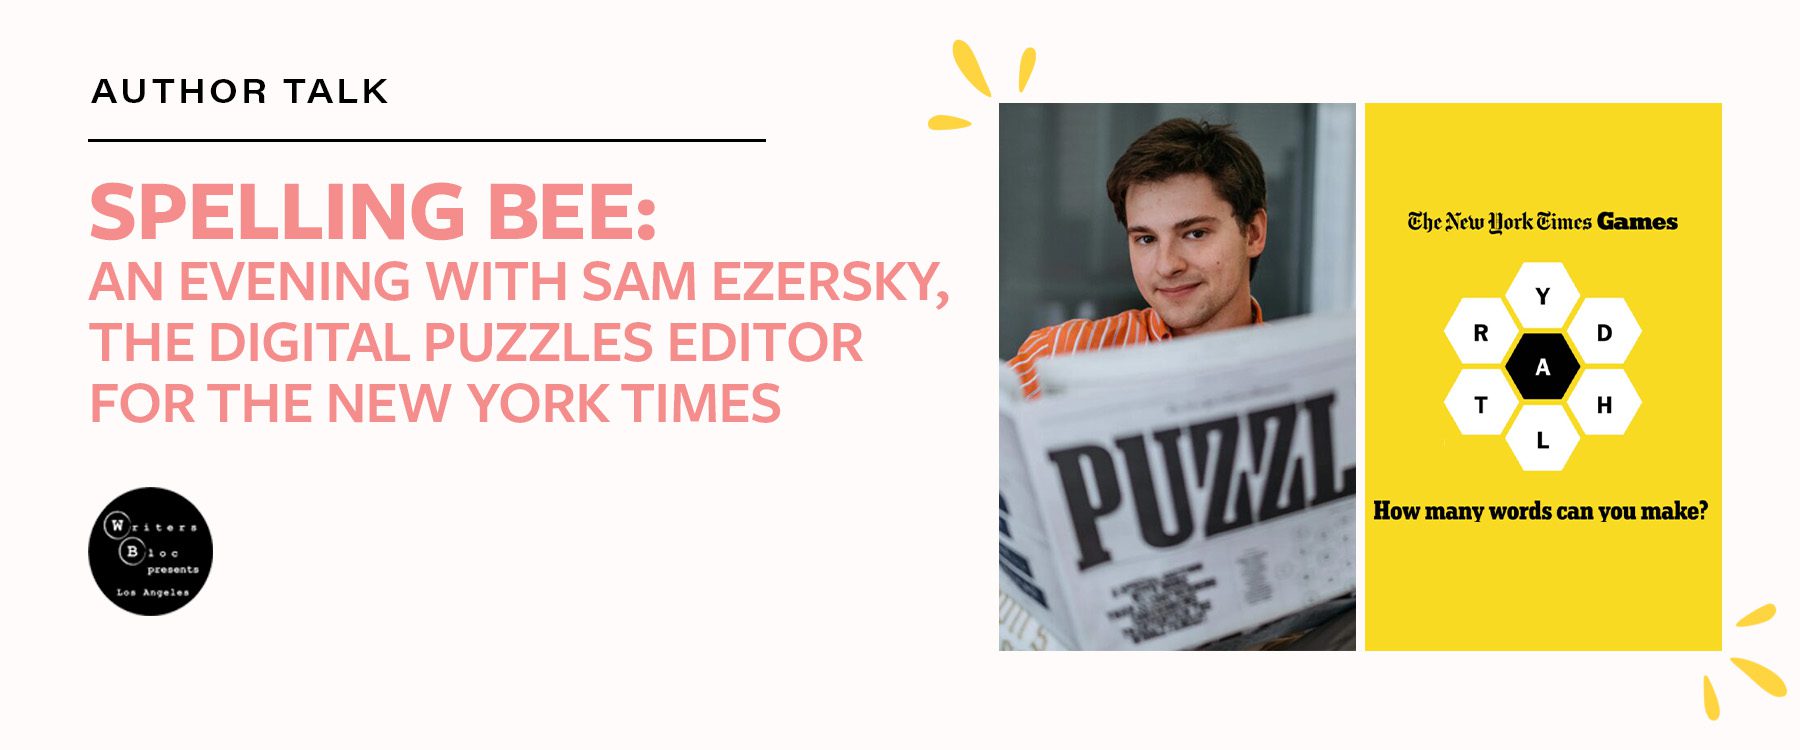 Spelling Bee: An Evening with Sam Ezersky, the Digital Puzzles Editor for the New York Times